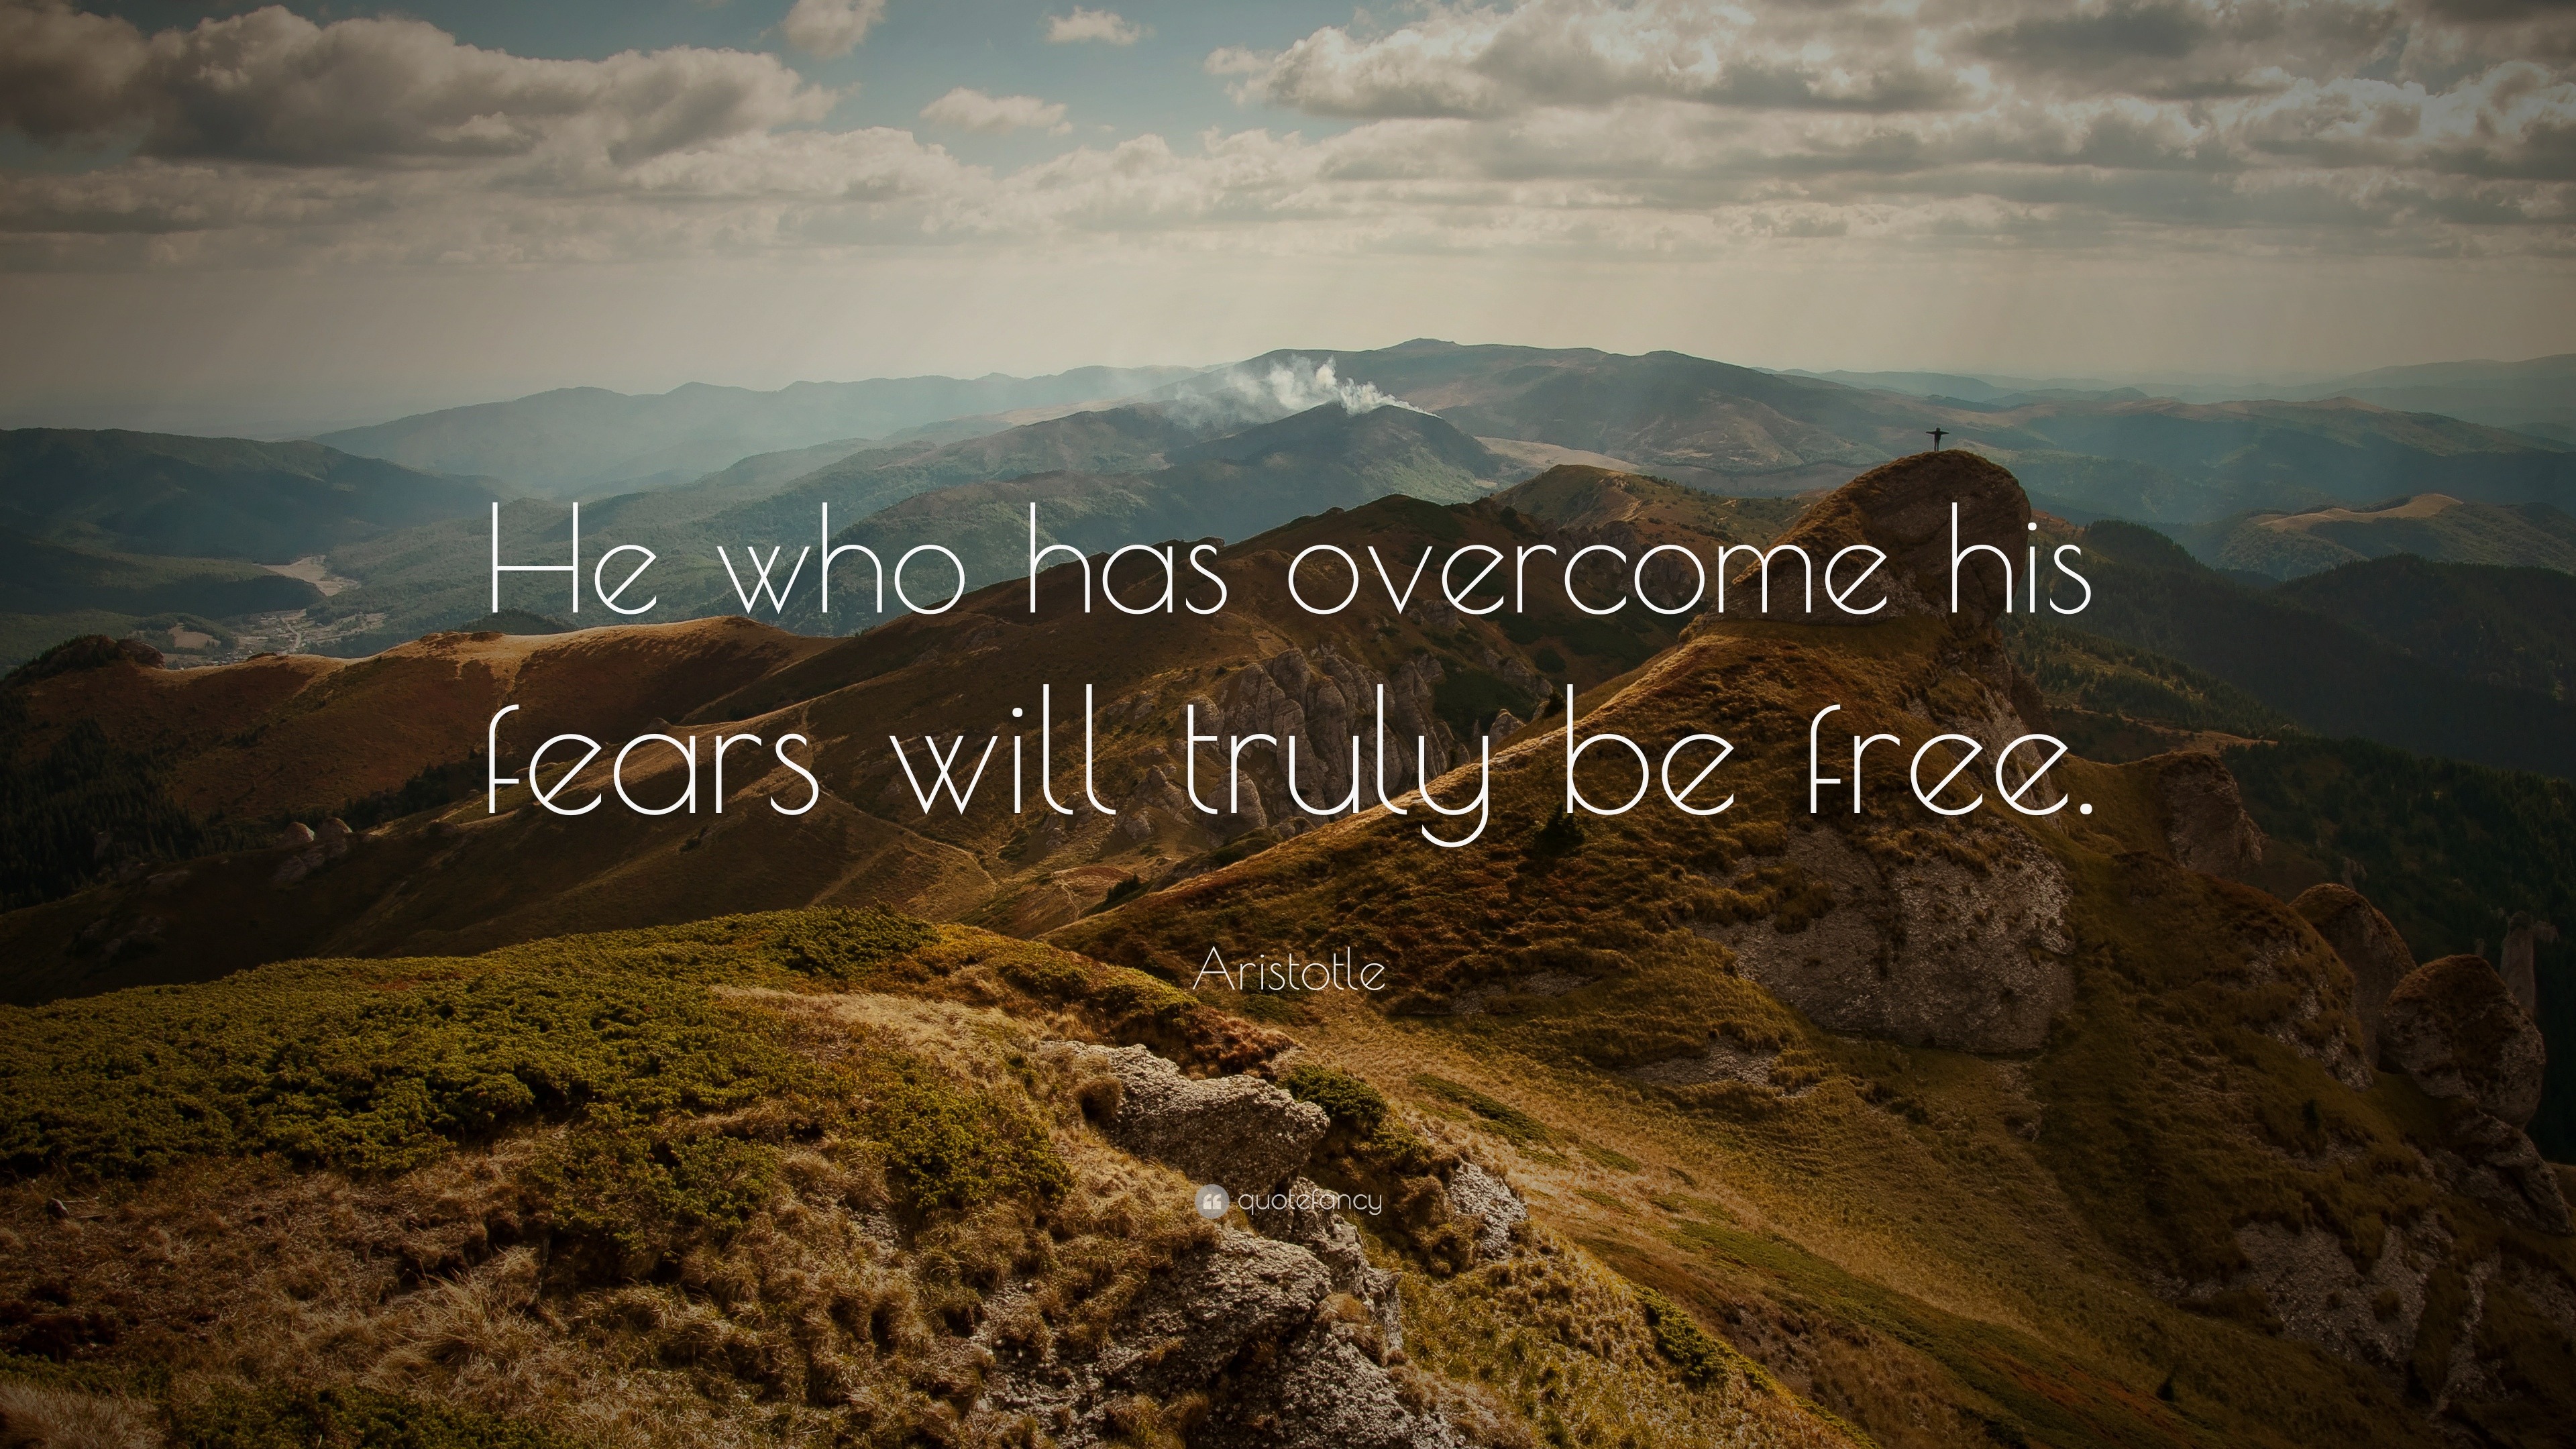 https://quotefancy.com/media/wallpaper/3840x2160/2906-Aristotle-Quote-He-who-has-overcome-his-fears-will-truly-be-free.jpg